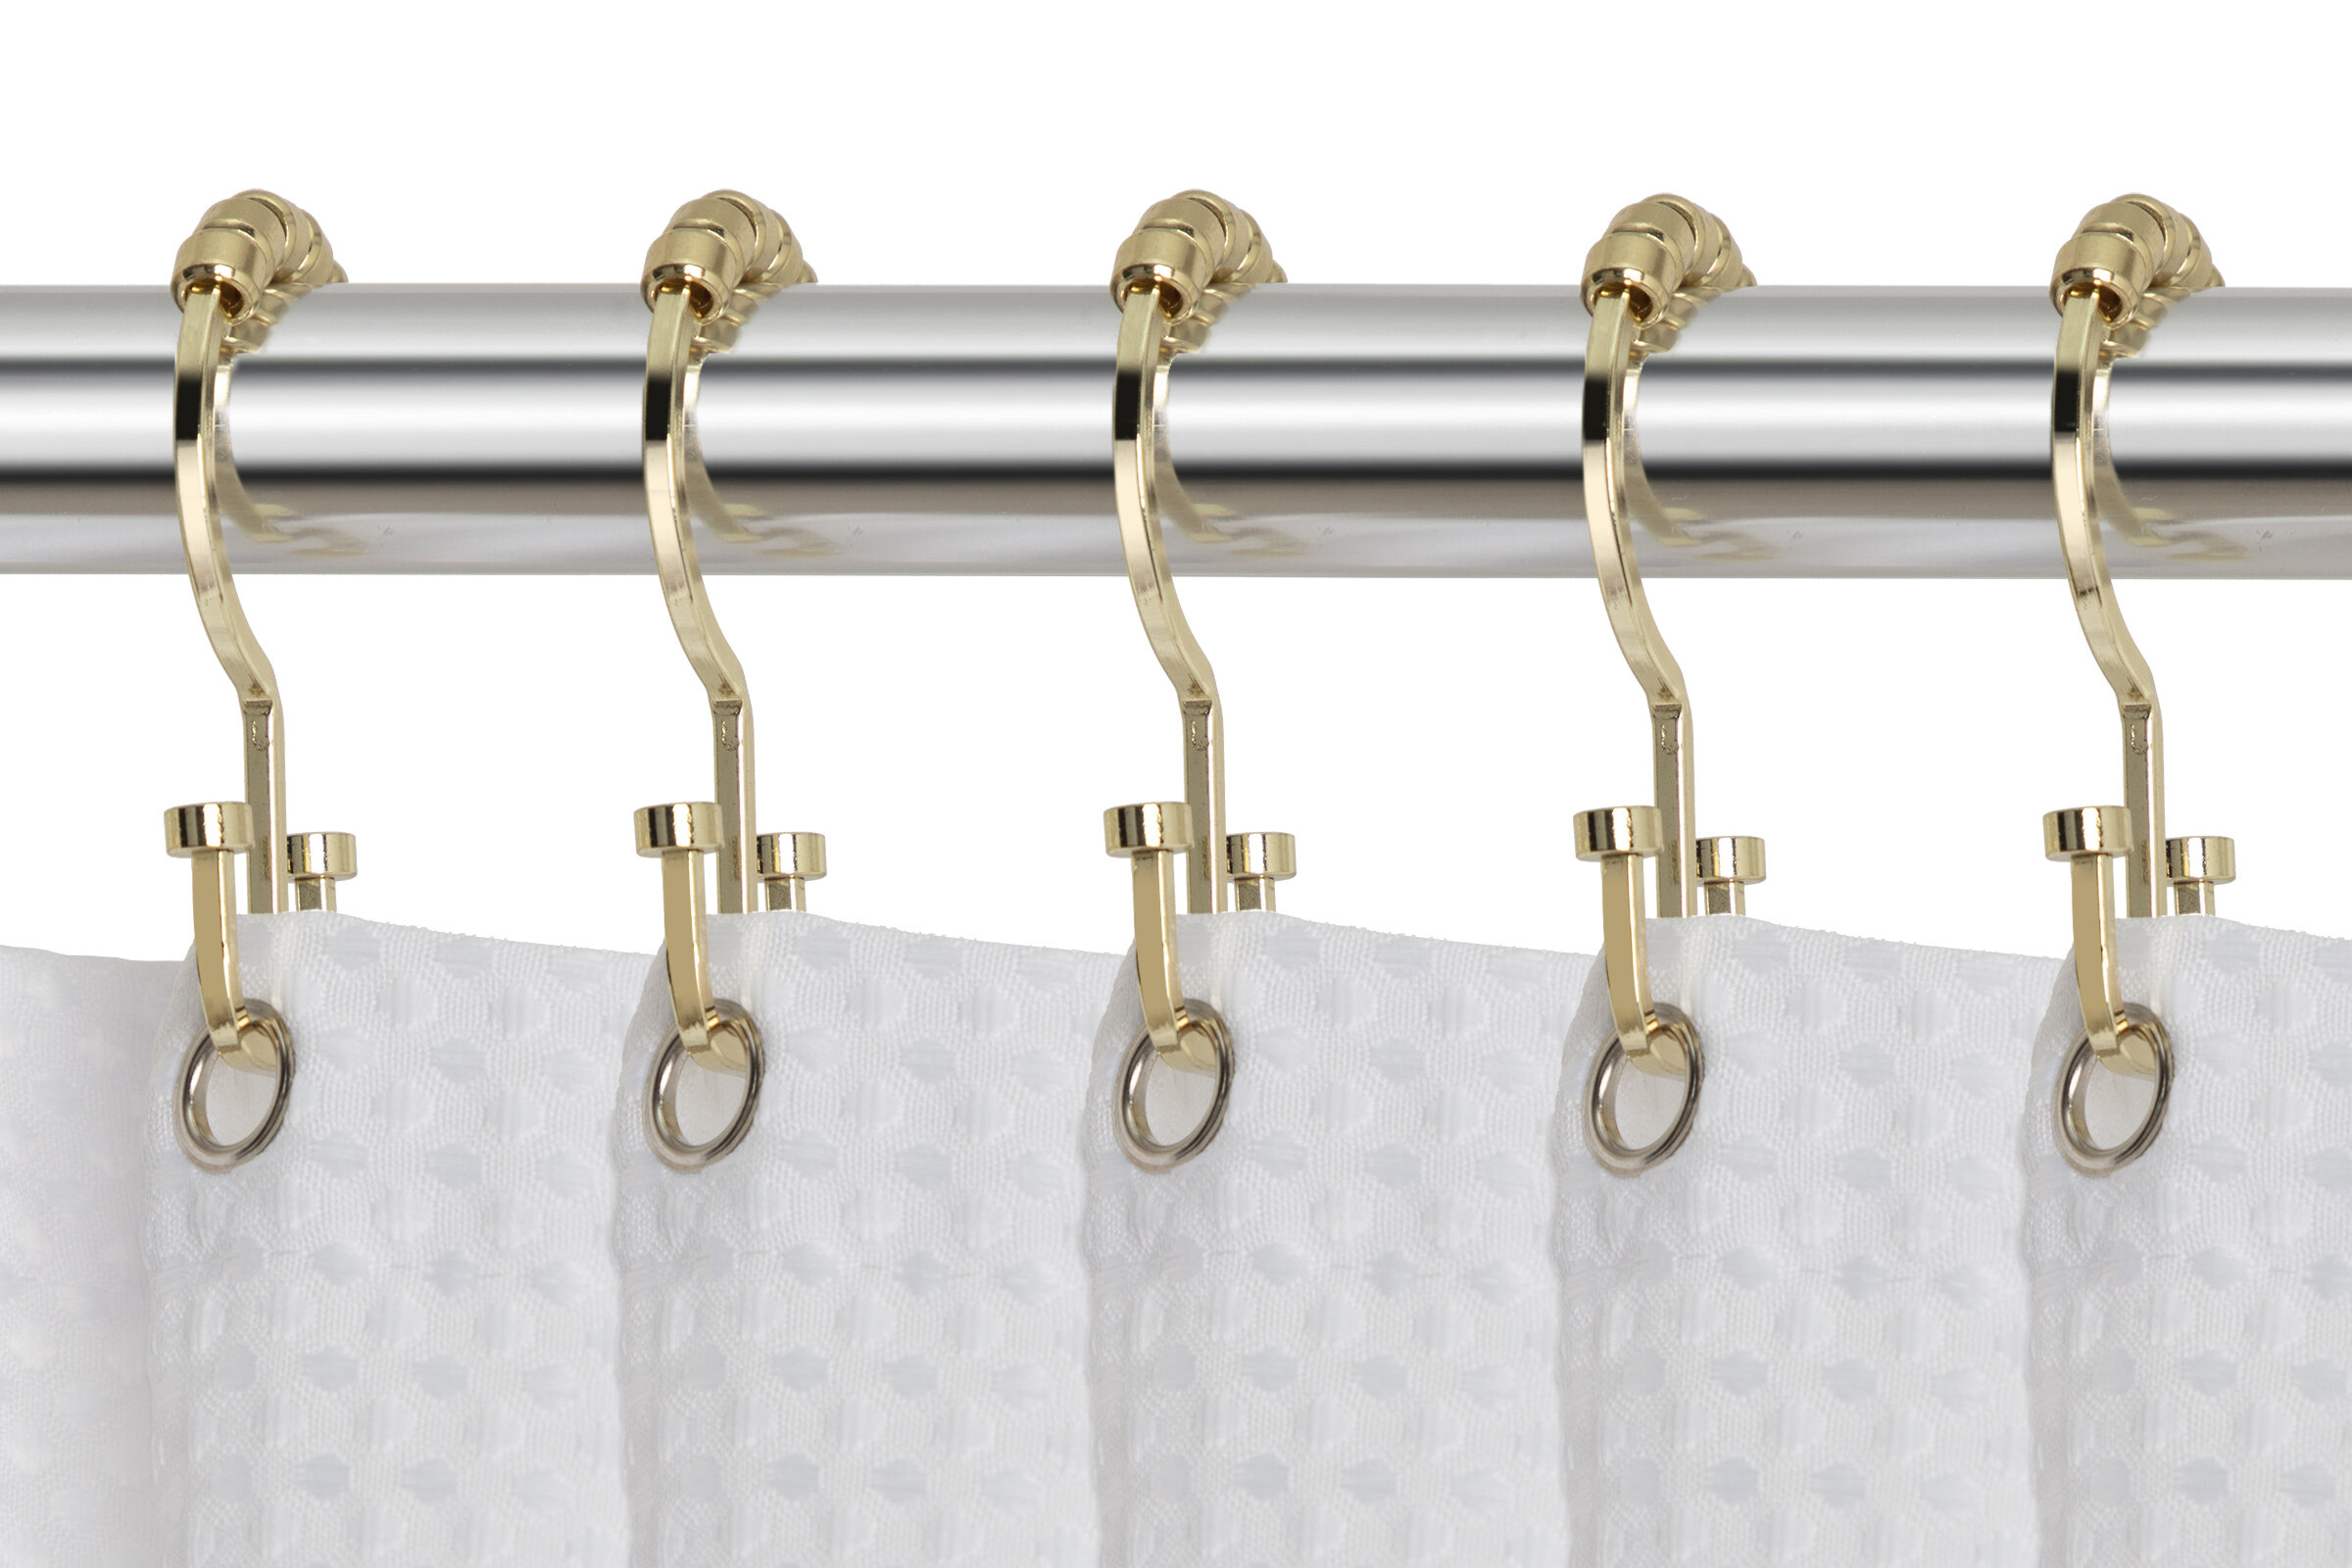 Metal Shower Curtain Hooks,Rust Proof Shower Curtain Rings for  Bathroom,T-Bar Decorative Shower Curtain Hooks for Shower Rod,Set of  12(Chrome)